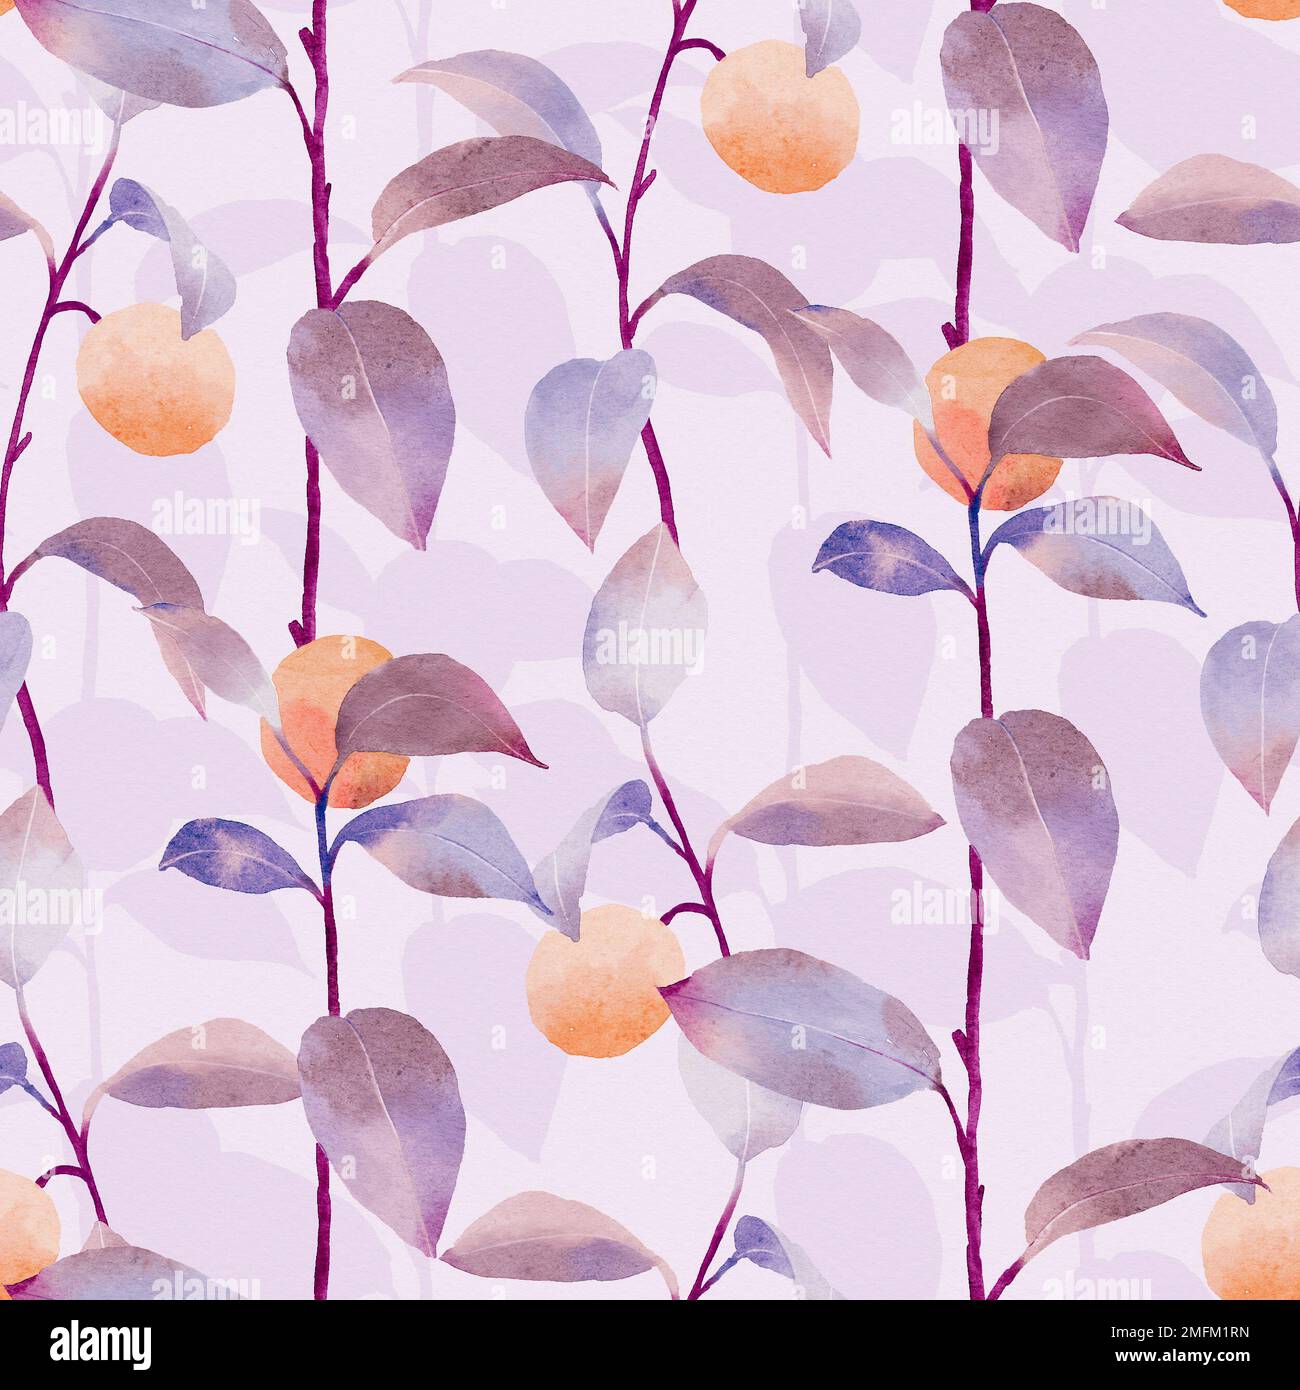 Watercolor seamless pattern with yellow lemons and leaves on light background. Stock Photo